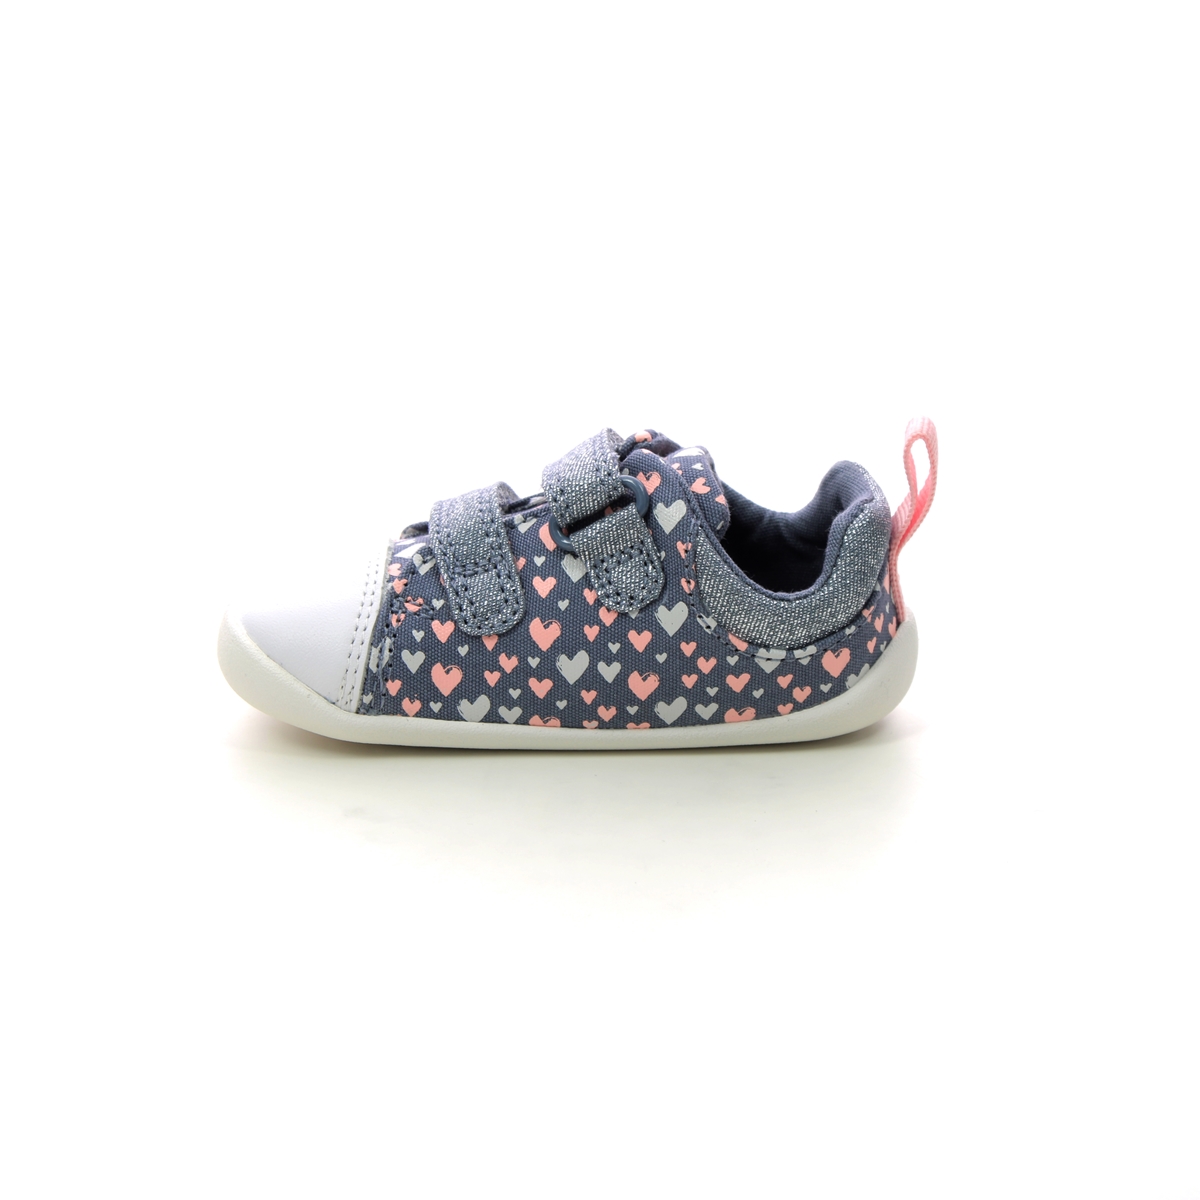 Clarks Craft T F Fit Denim blue girls first and baby shoes